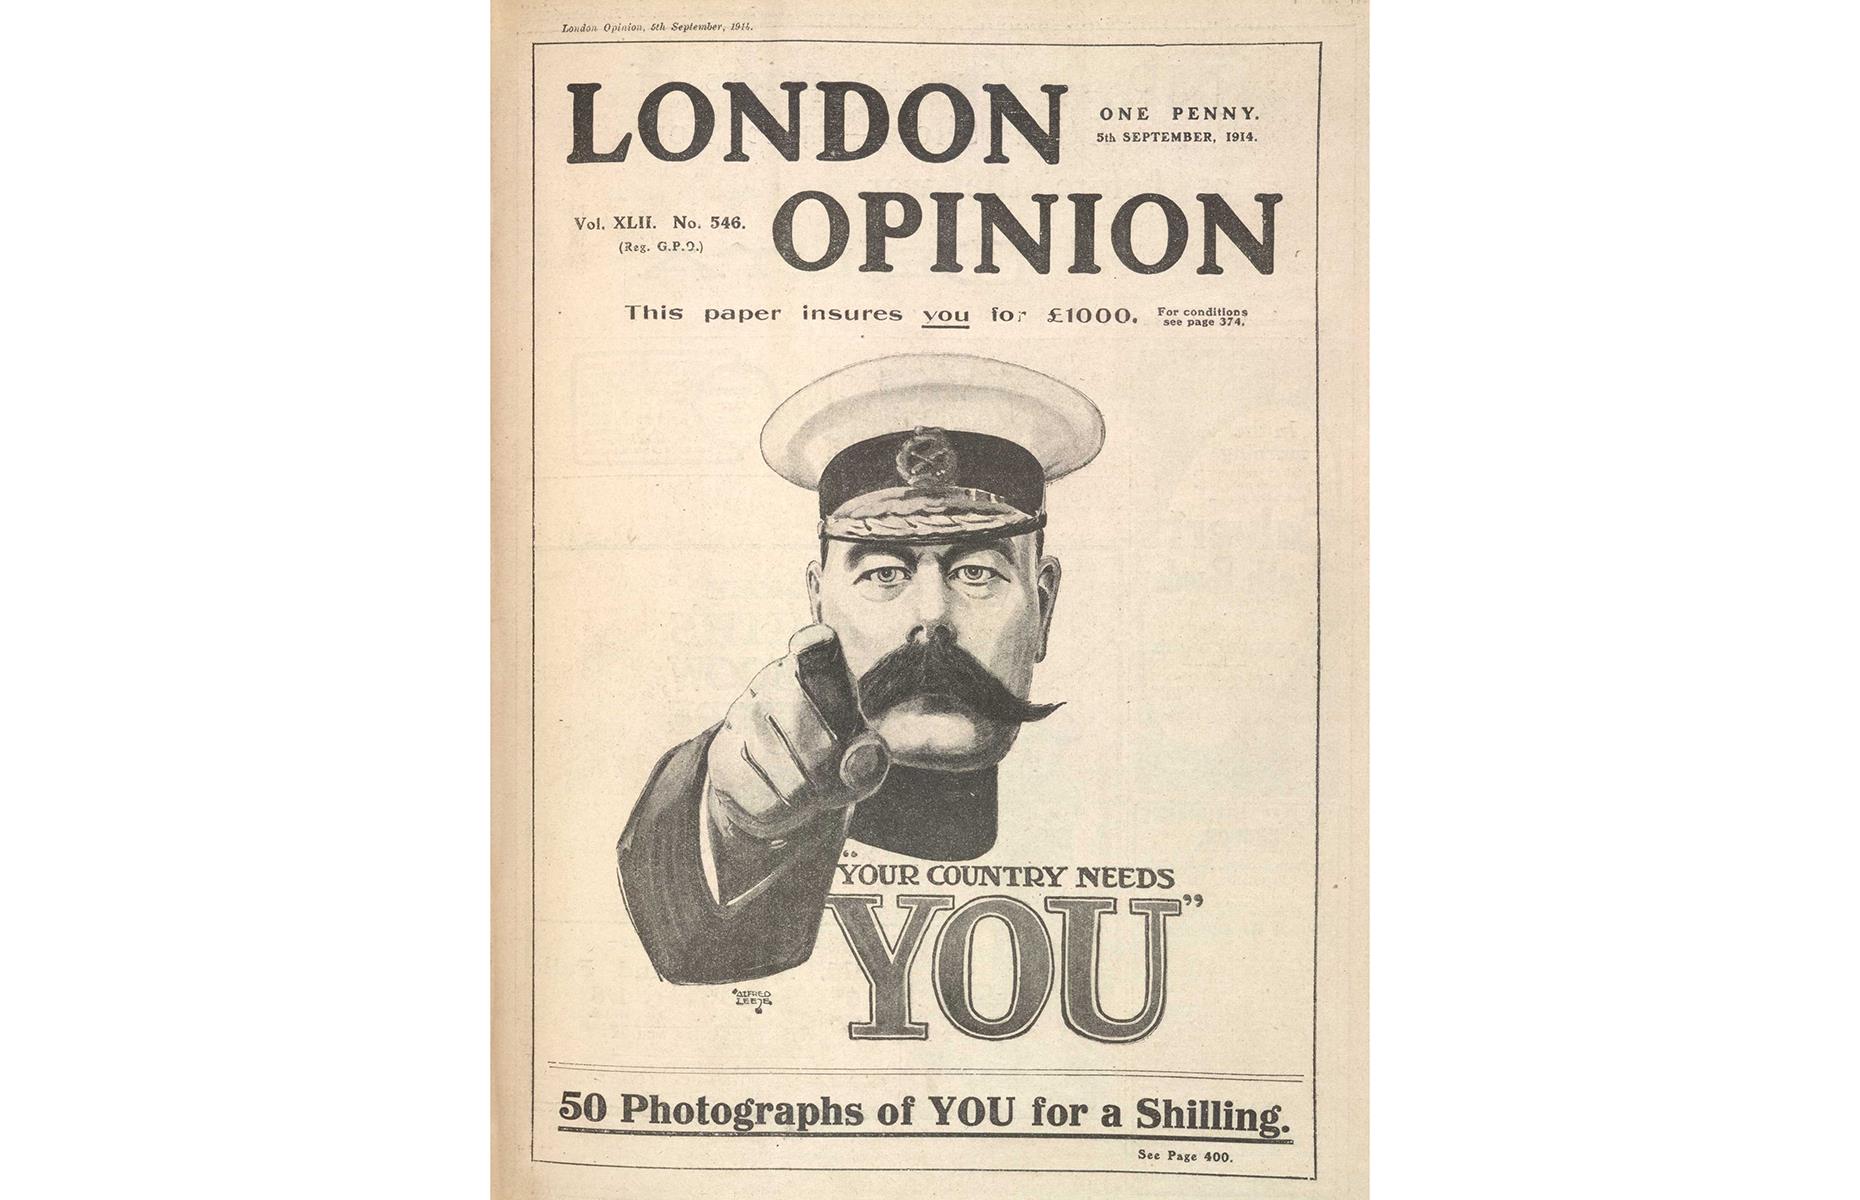 British Expeditionary Force’s ‘Your Country Needs You’ (1914)